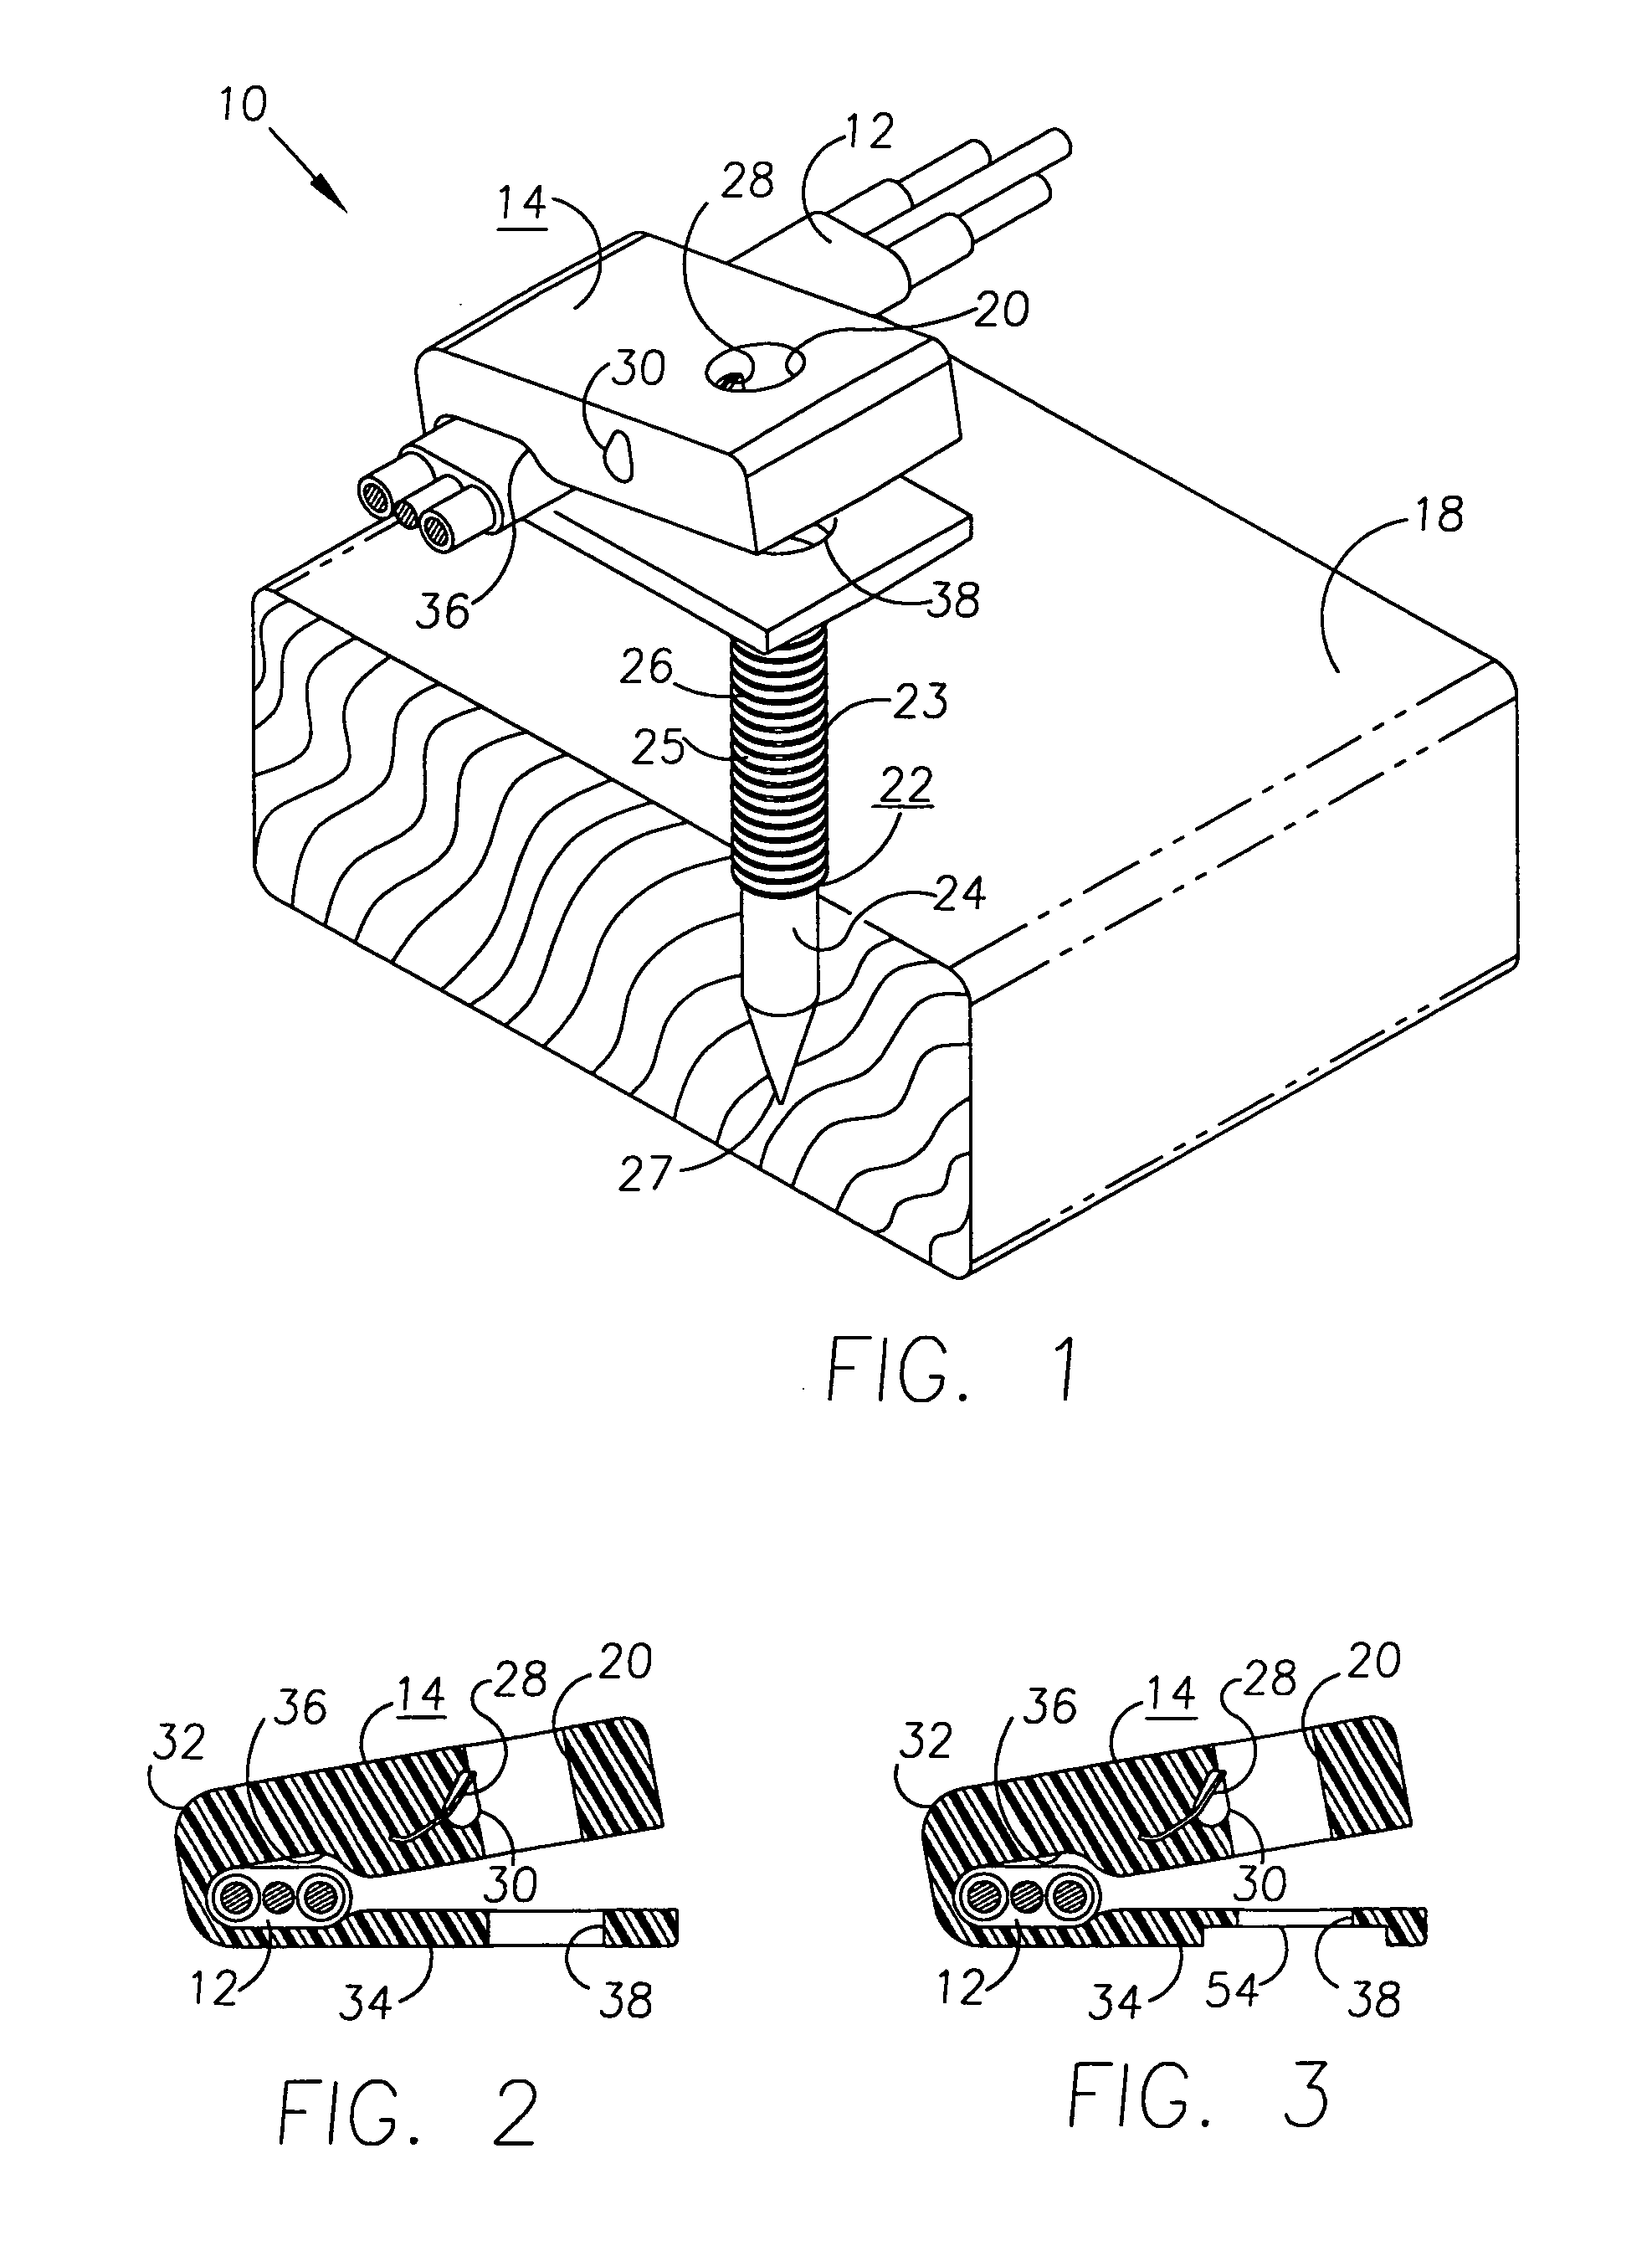 Fastener and method for supporting elongated material